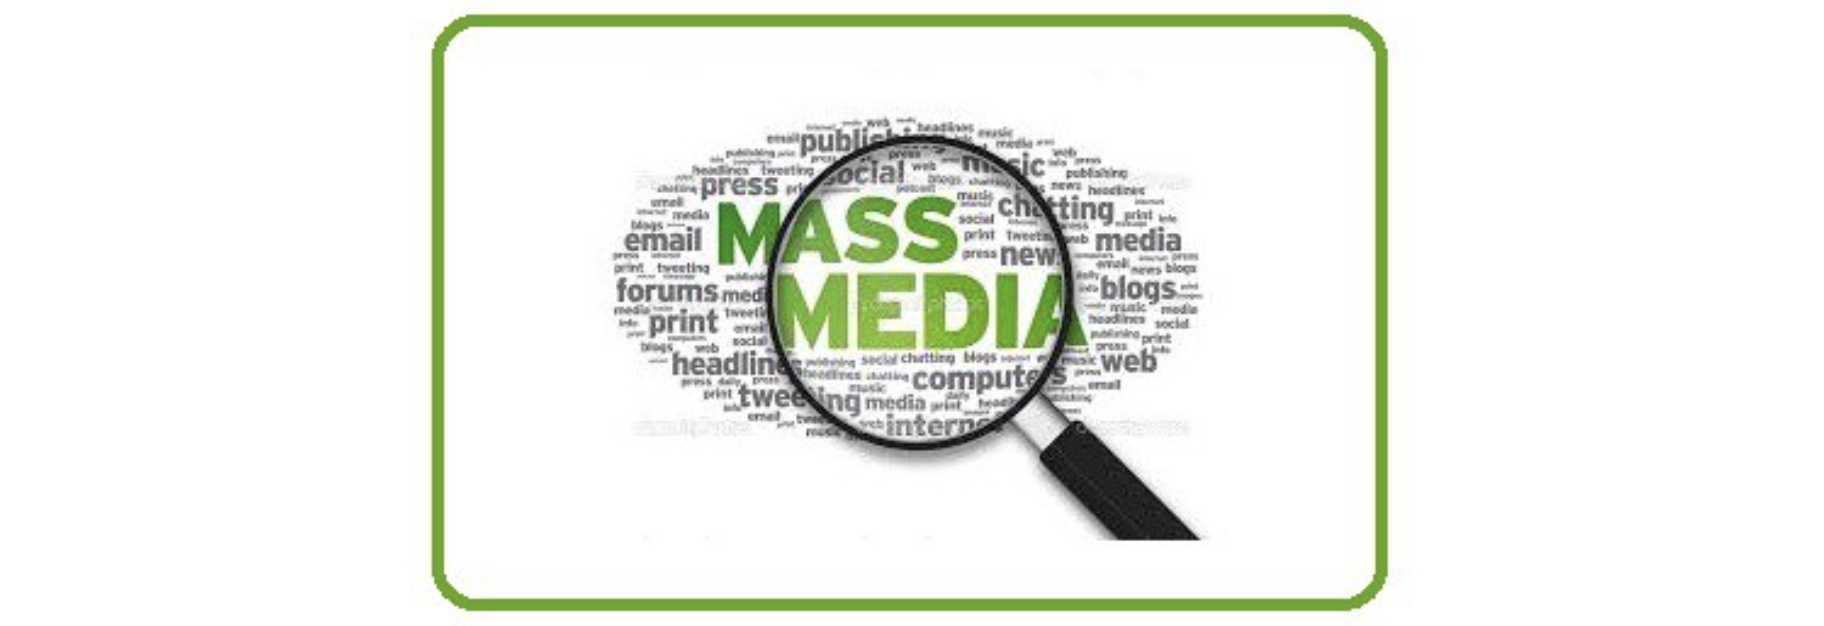 Ideology Detection in the Indian Mass Media